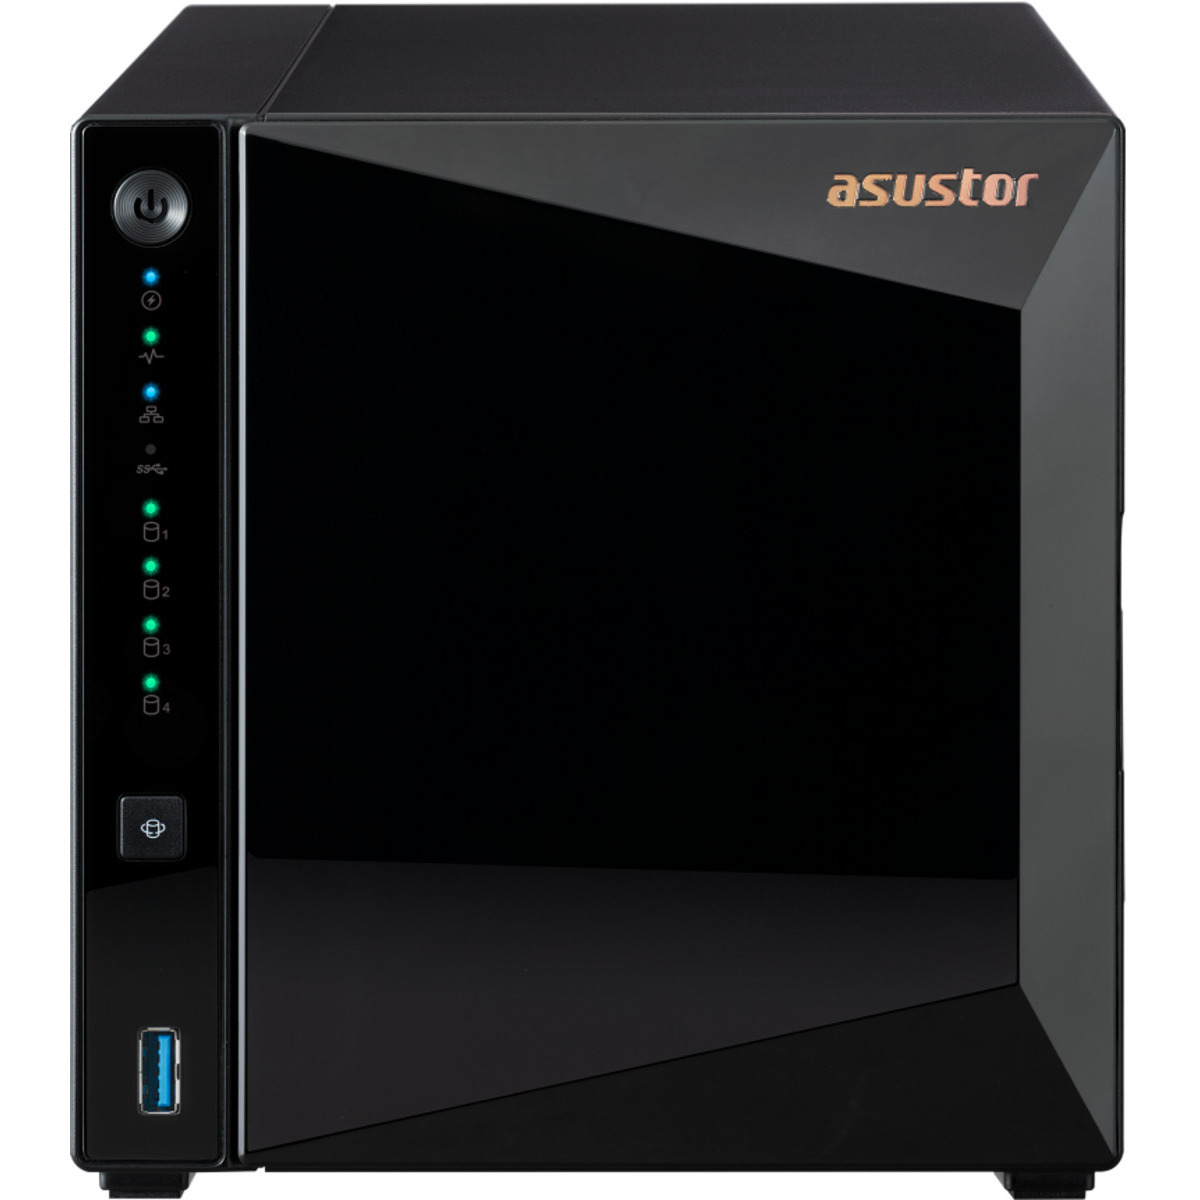 buy ASUSTOR DRIVESTOR 4 Pro Gen2 AS3304T v2 16tb Desktop NAS - Network Attached Storage Device 4x4000gb Seagate BarraCuda ST4000DM004 3.5 7200rpm SATA 6Gb/s HDD CONSUMER Class Drives Installed - Burn-In Tested - nas headquarters buy network attached storage server device das new raid-5 free shipping usa spring sale DRIVESTOR 4 Pro Gen2 AS3304T v2